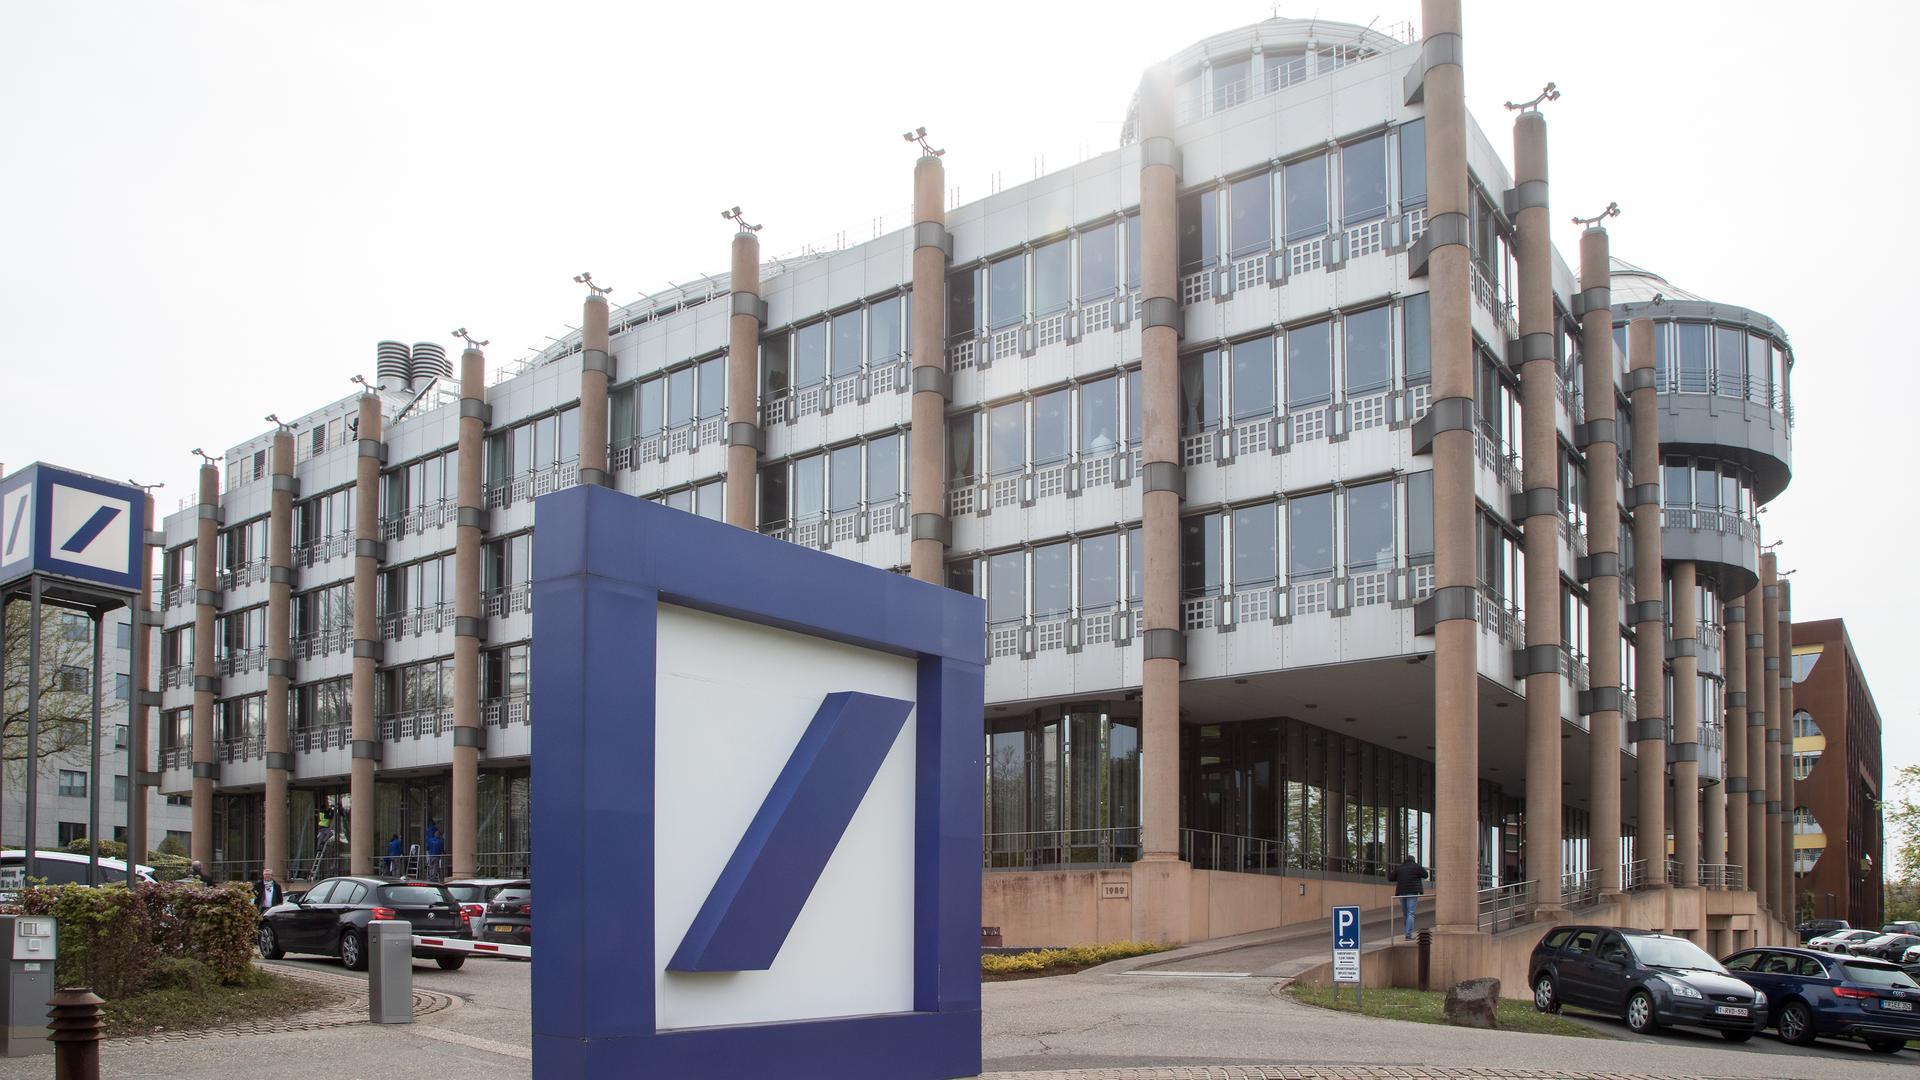 Deutsche Bank has been located in its Kirchberg building since the 1990s, but is now looking to move into more modern premises